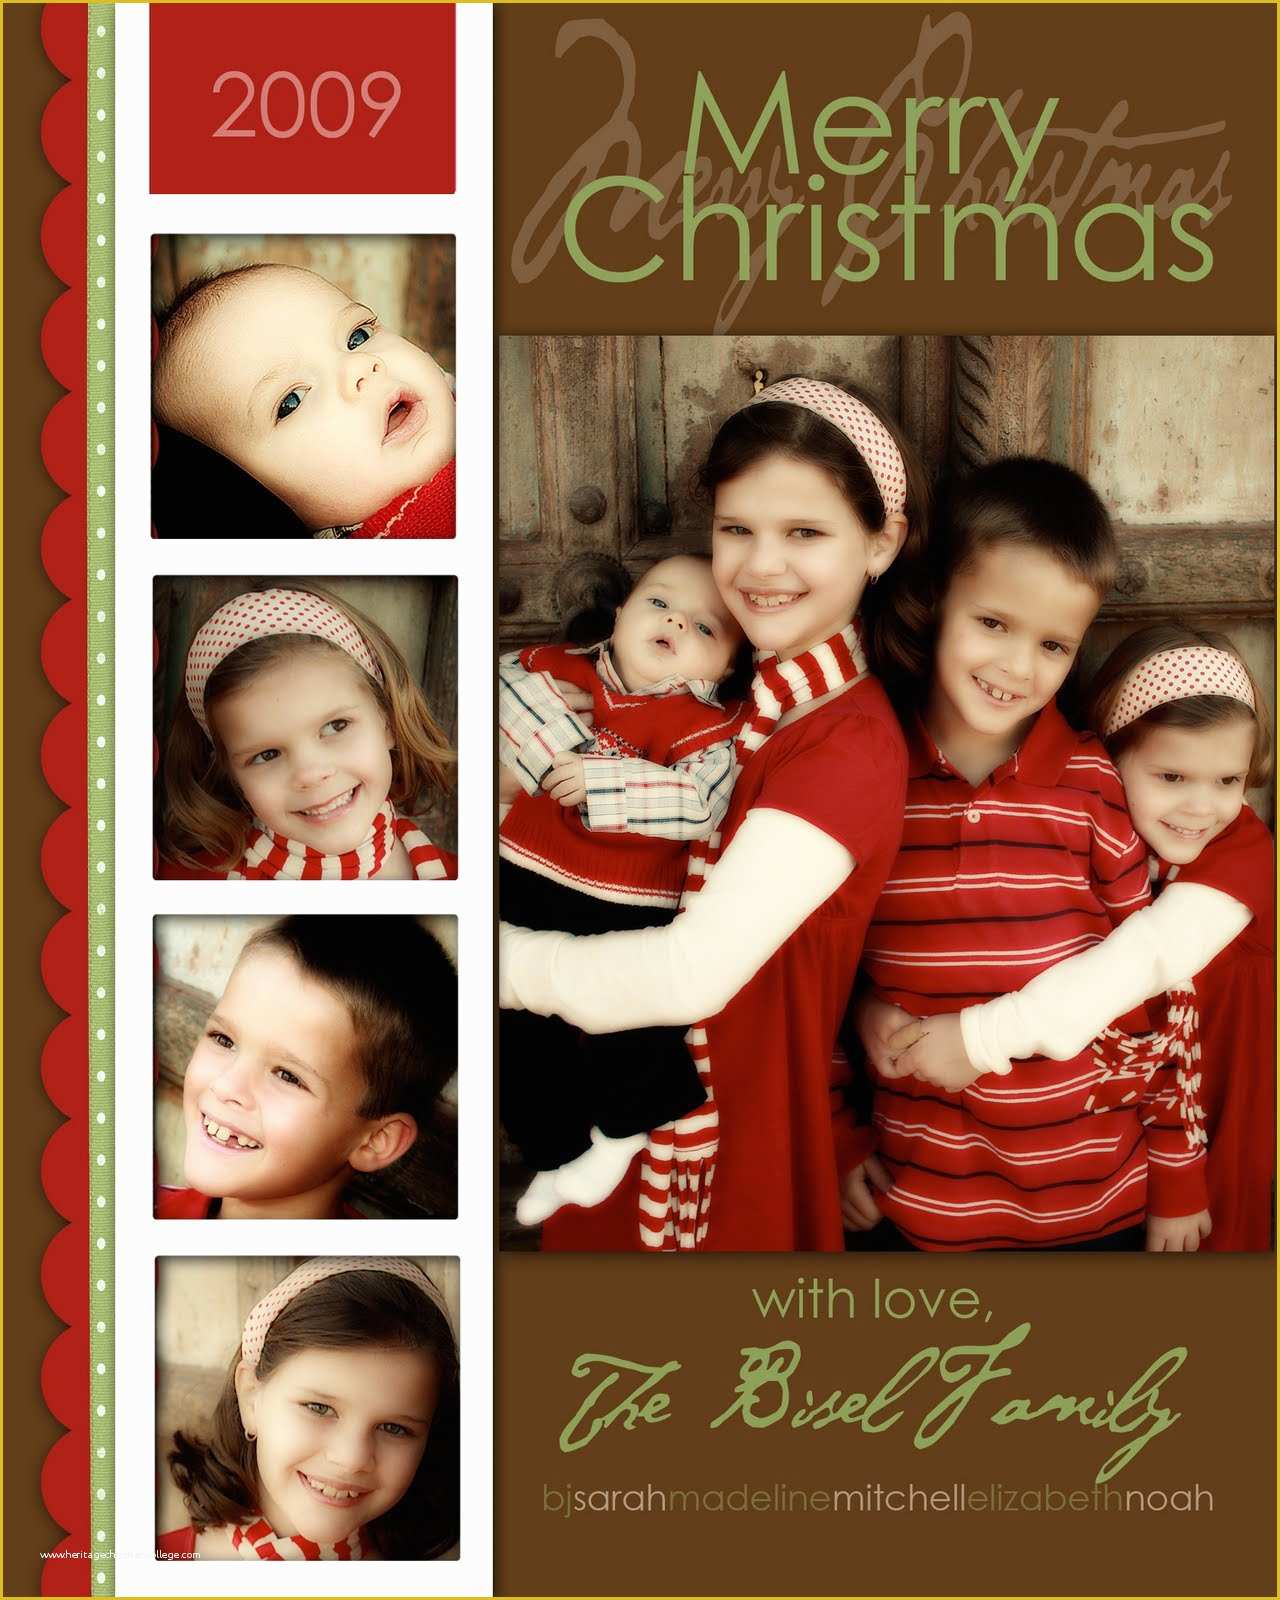 Free HTML Christmas Card Email Templates Of Milkandhoneydesigns My Loss Your Gain Free Christmas